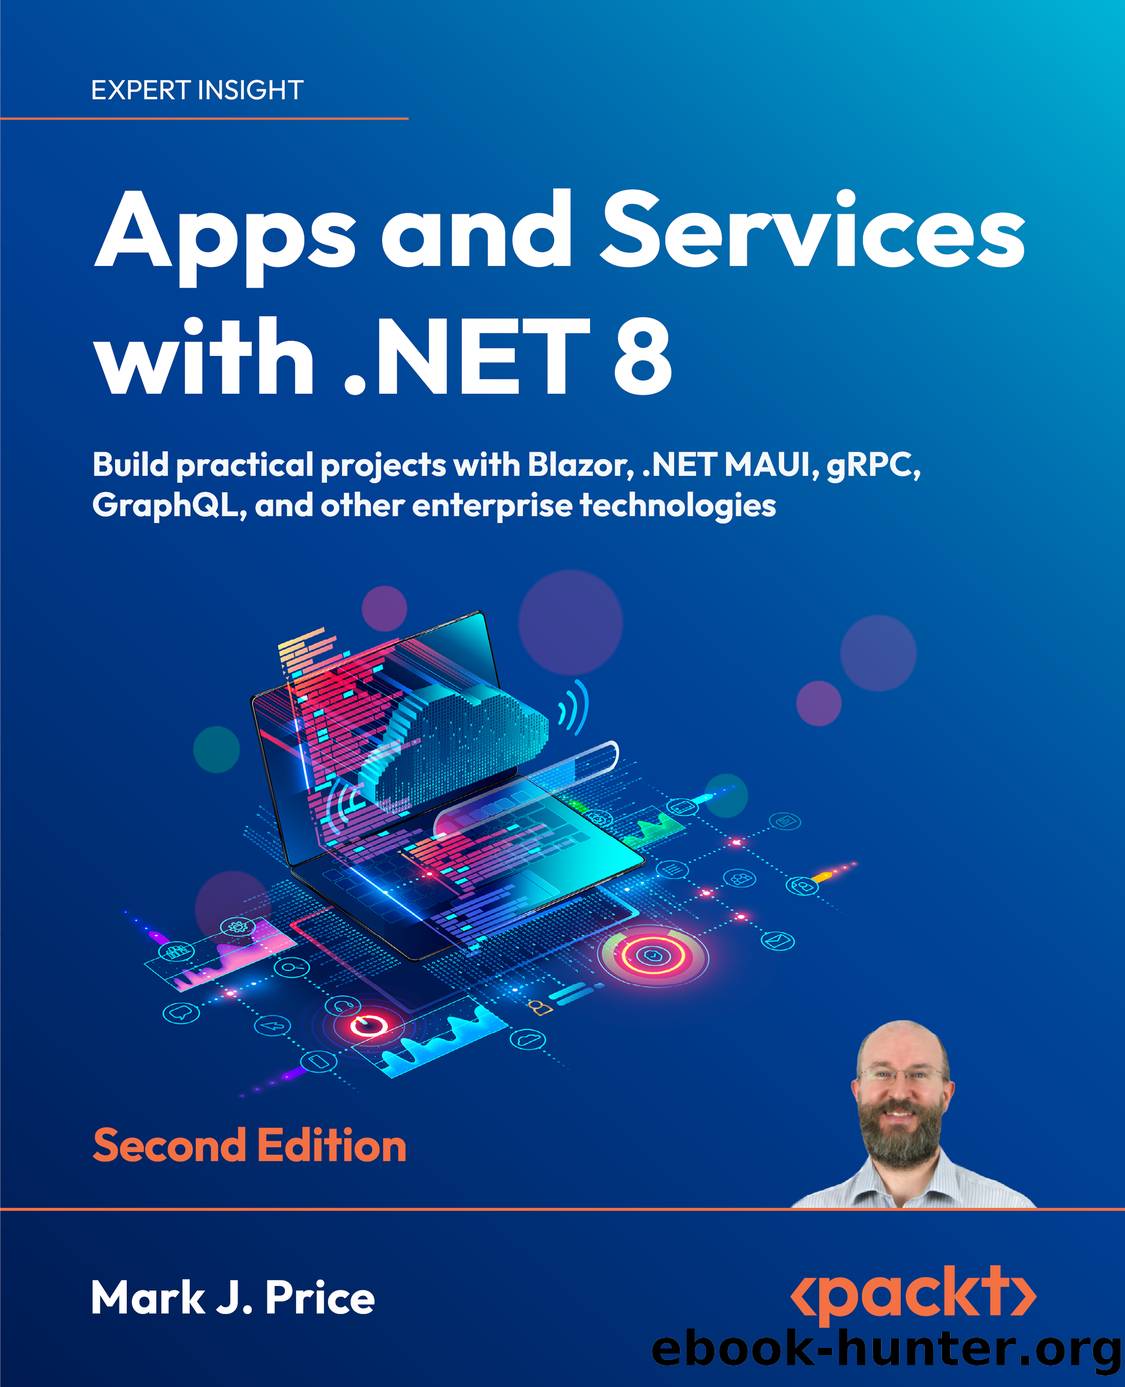 Apps and Services with .NET 8, Second Edition by Mark J. Price